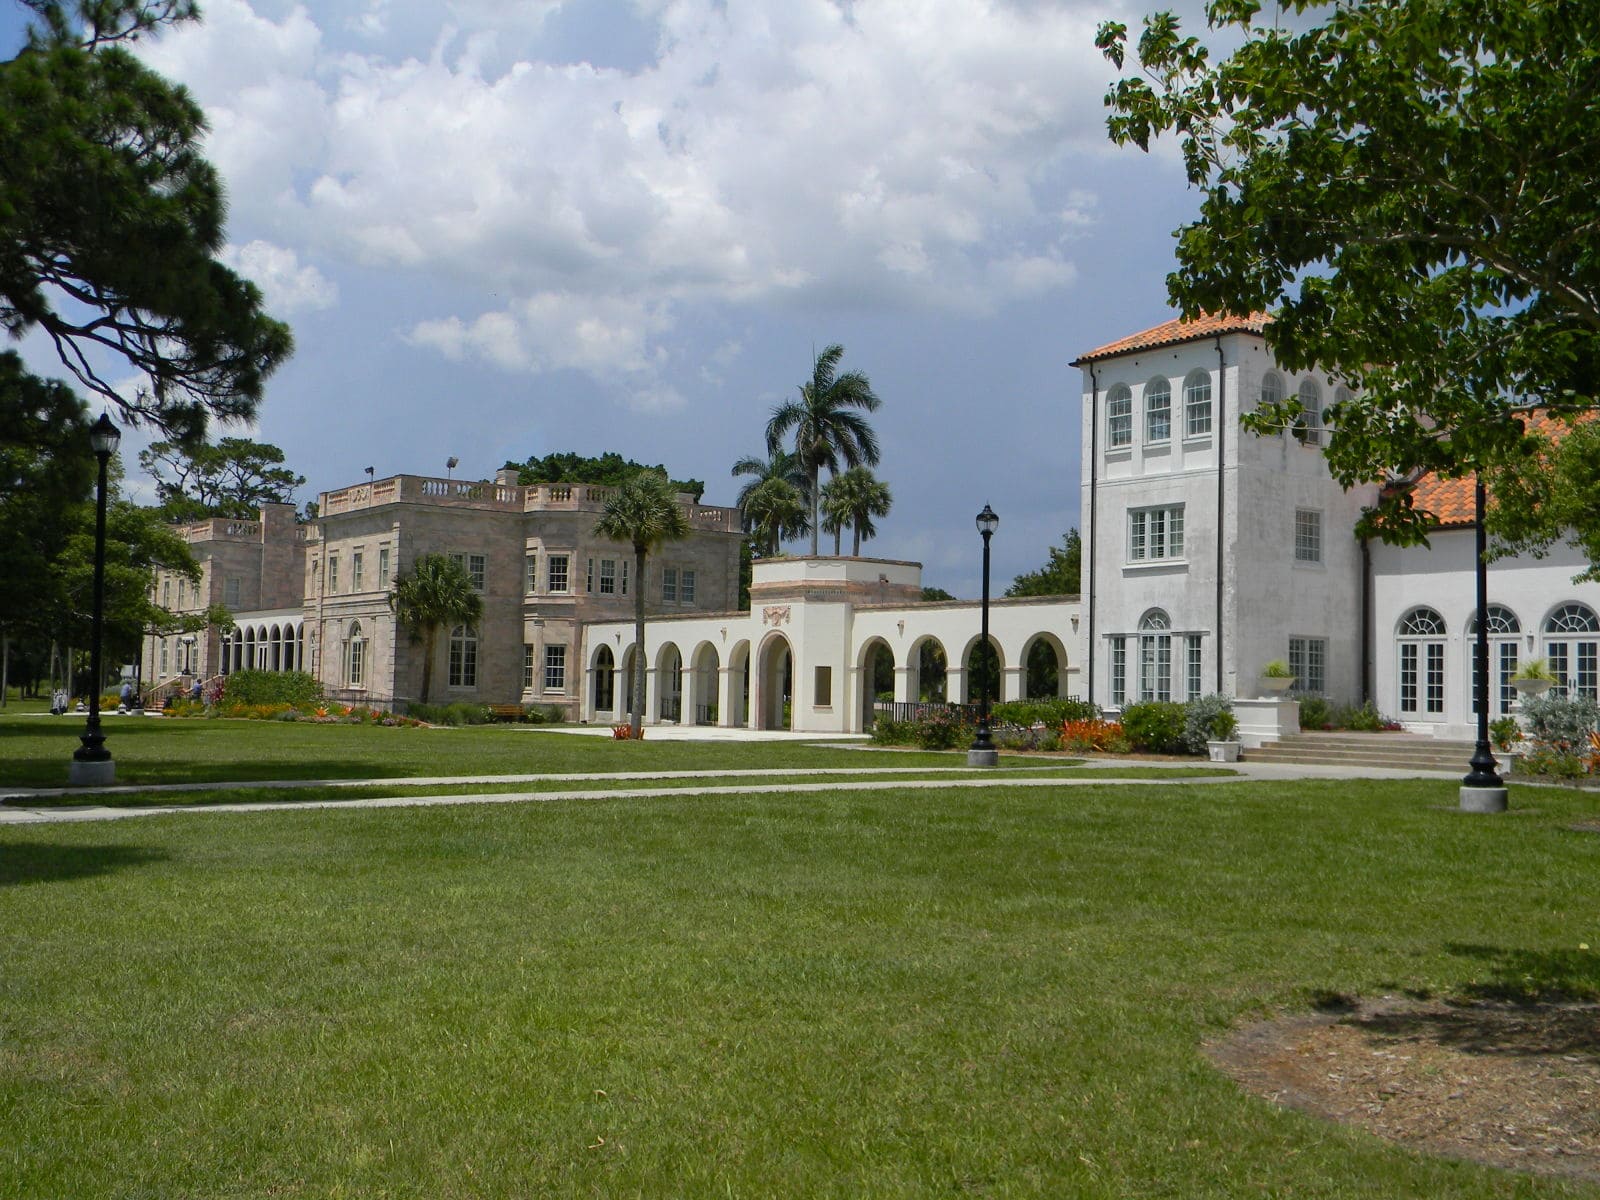 New_College_of_Florida's_College_Hall_&_Cook_Hall_Rear_Elevations_(Former_Charles_Ringling_&_Hester_Ringling_Sanford_Estates)